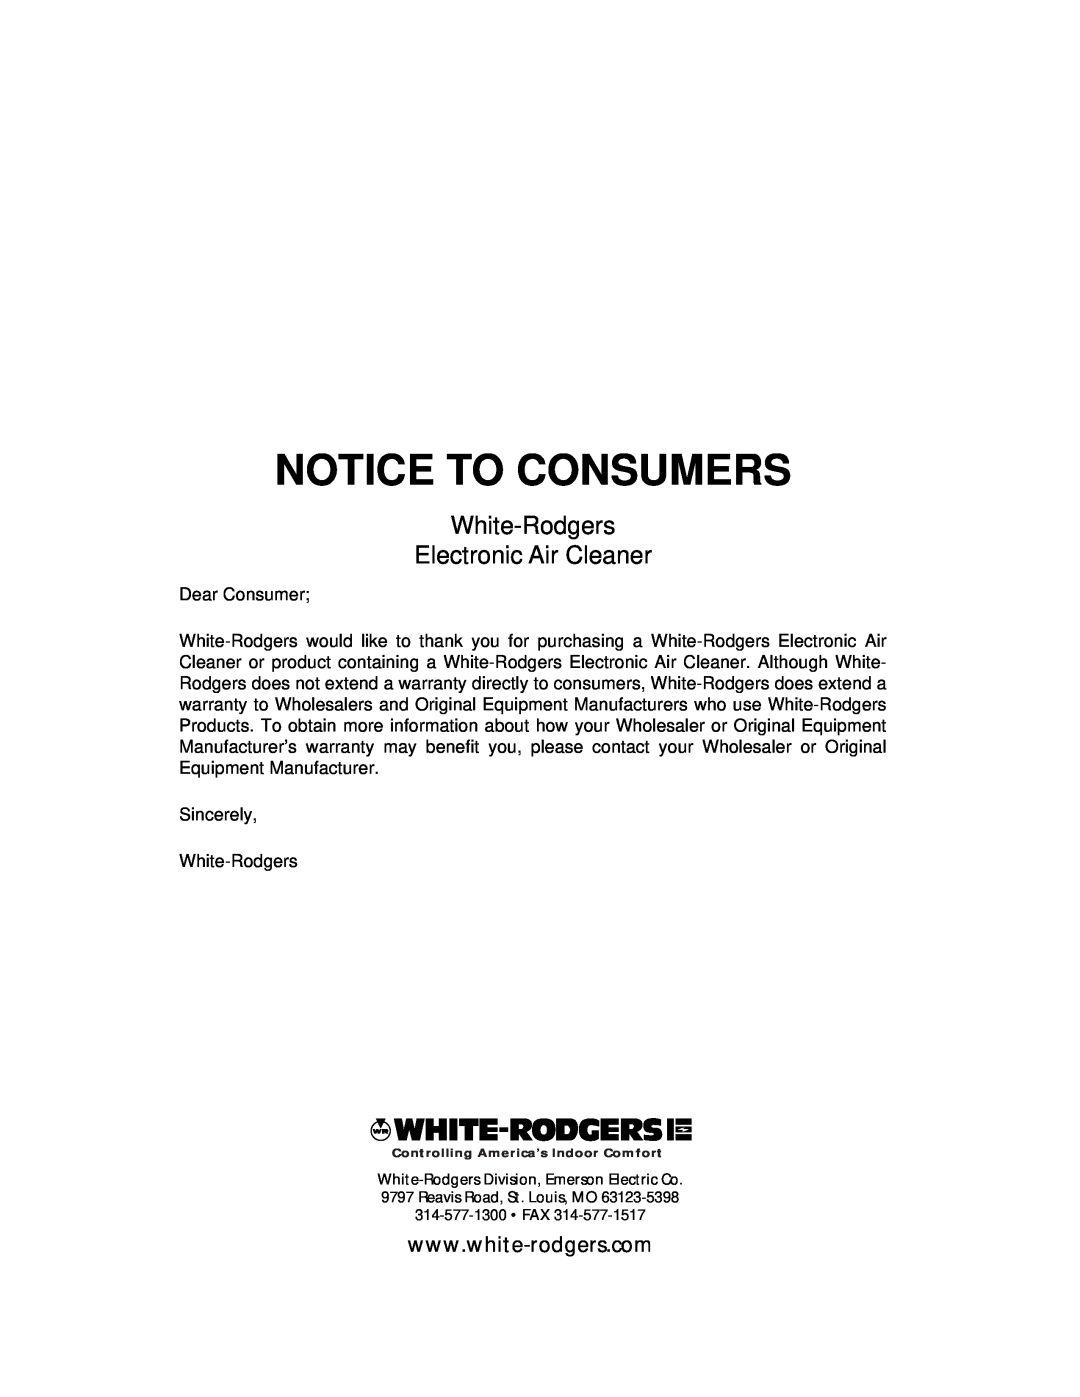 Emerson 16C26S-010 owner manual Notice To Consumers, White-Rodgers Electronic Air Cleaner 